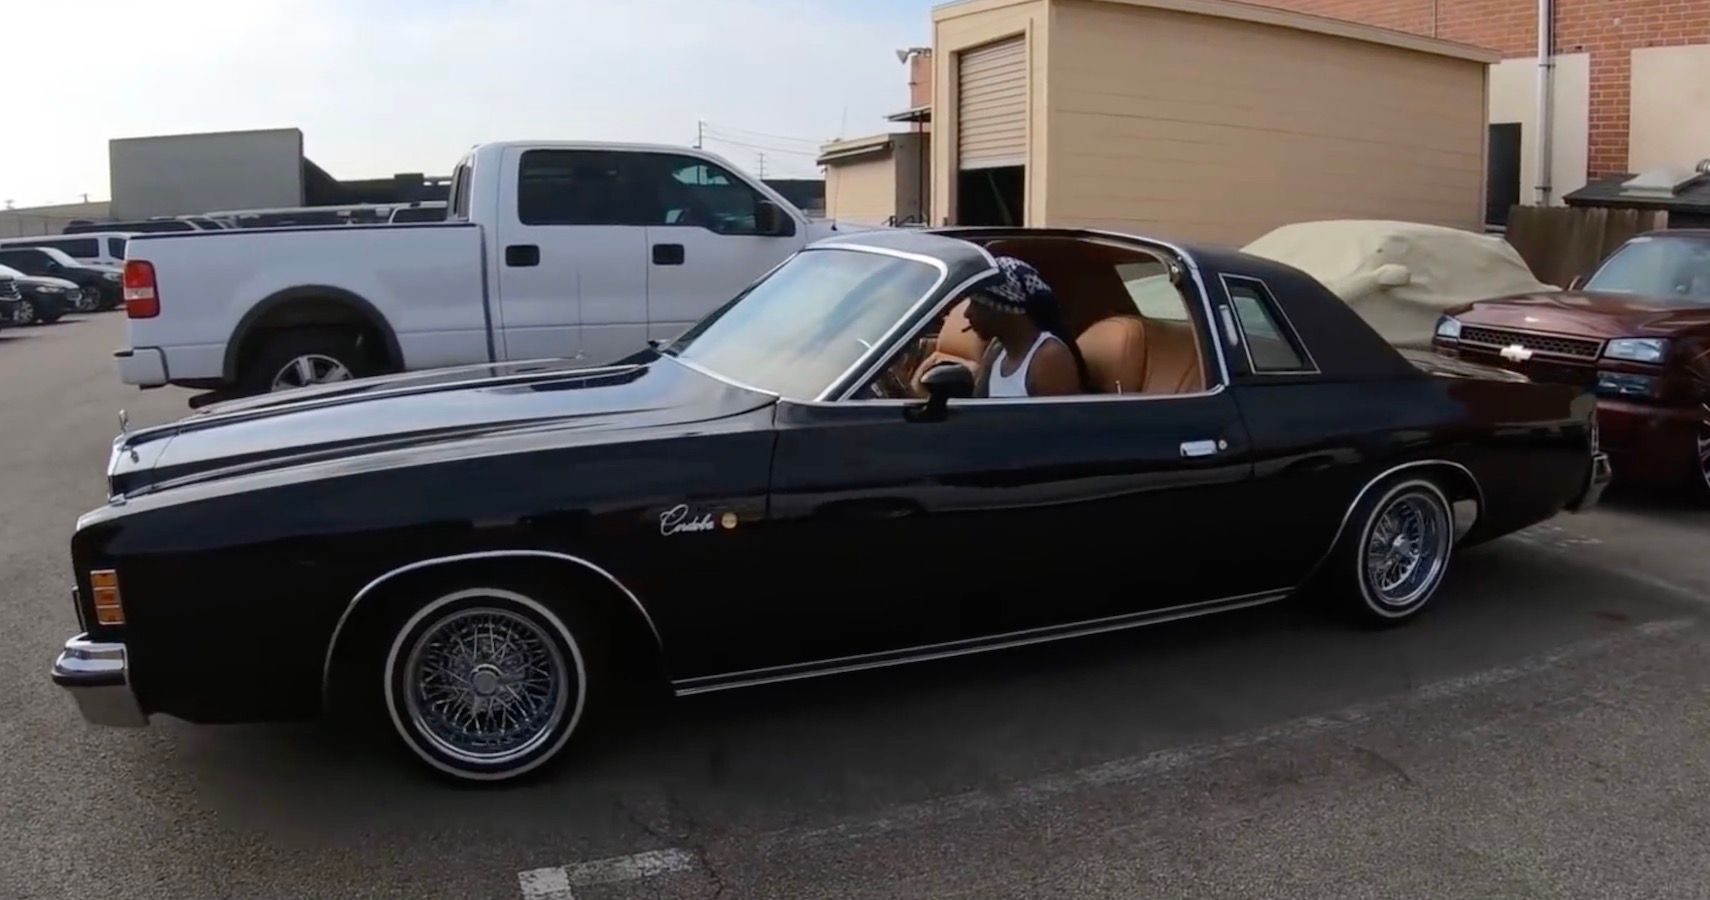 See Snoop Dogg's Birthday Gifts To Himself: Classic Chrysler Cordoba And Chevy Bel Air